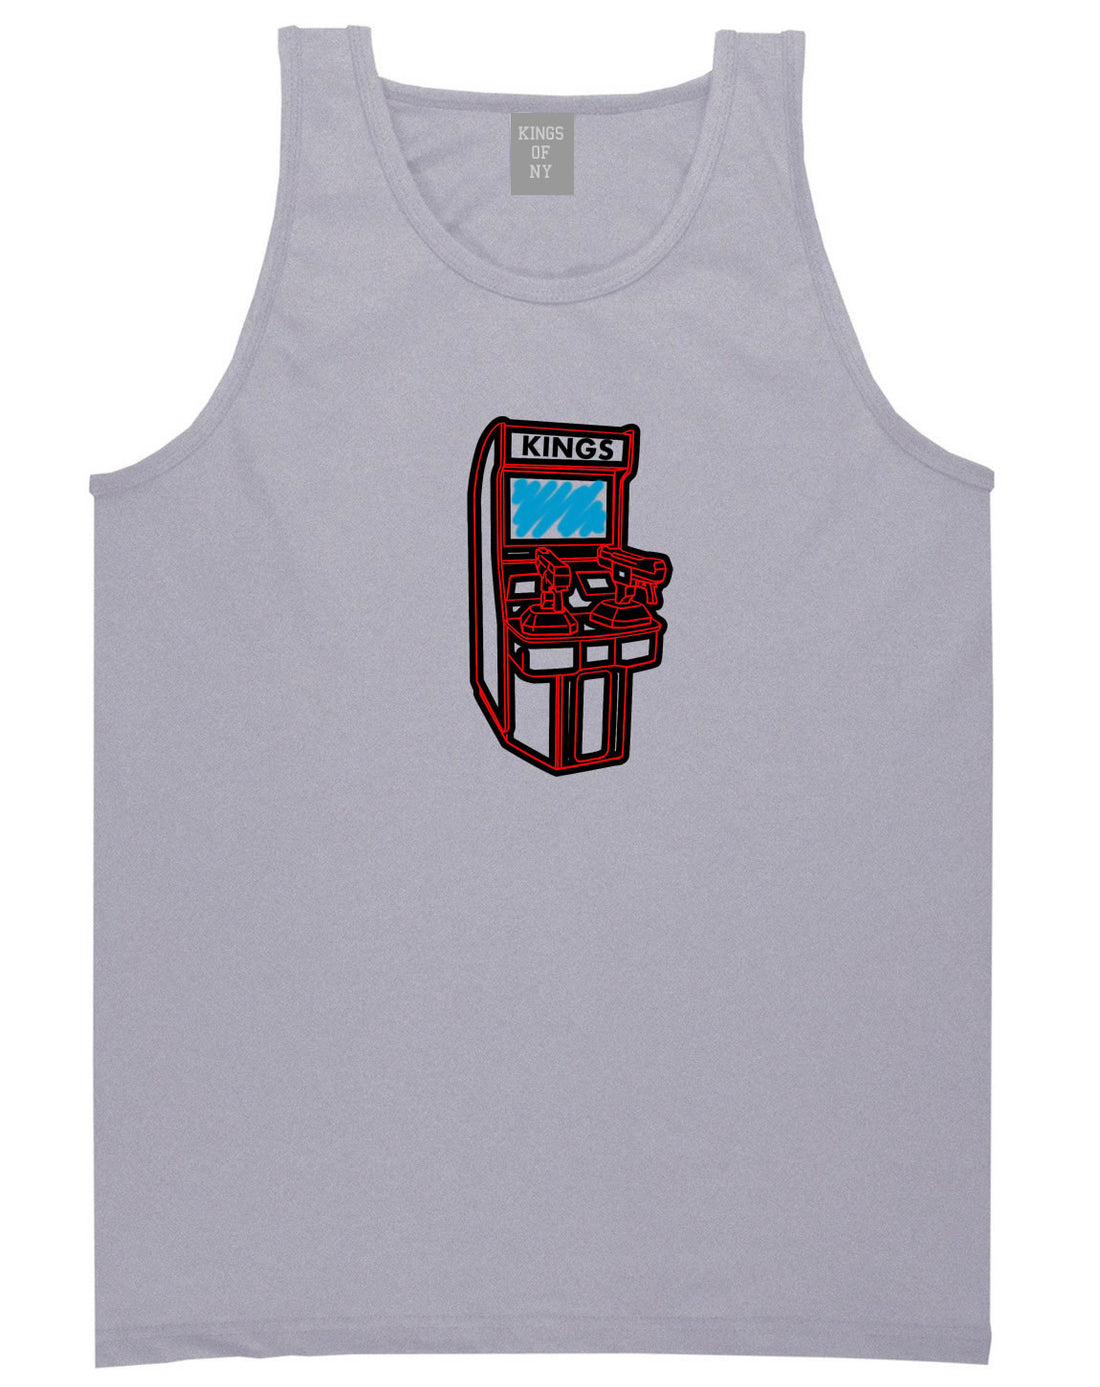 Arcade Game Gamer Tank Top in Grey By Kings Of NY